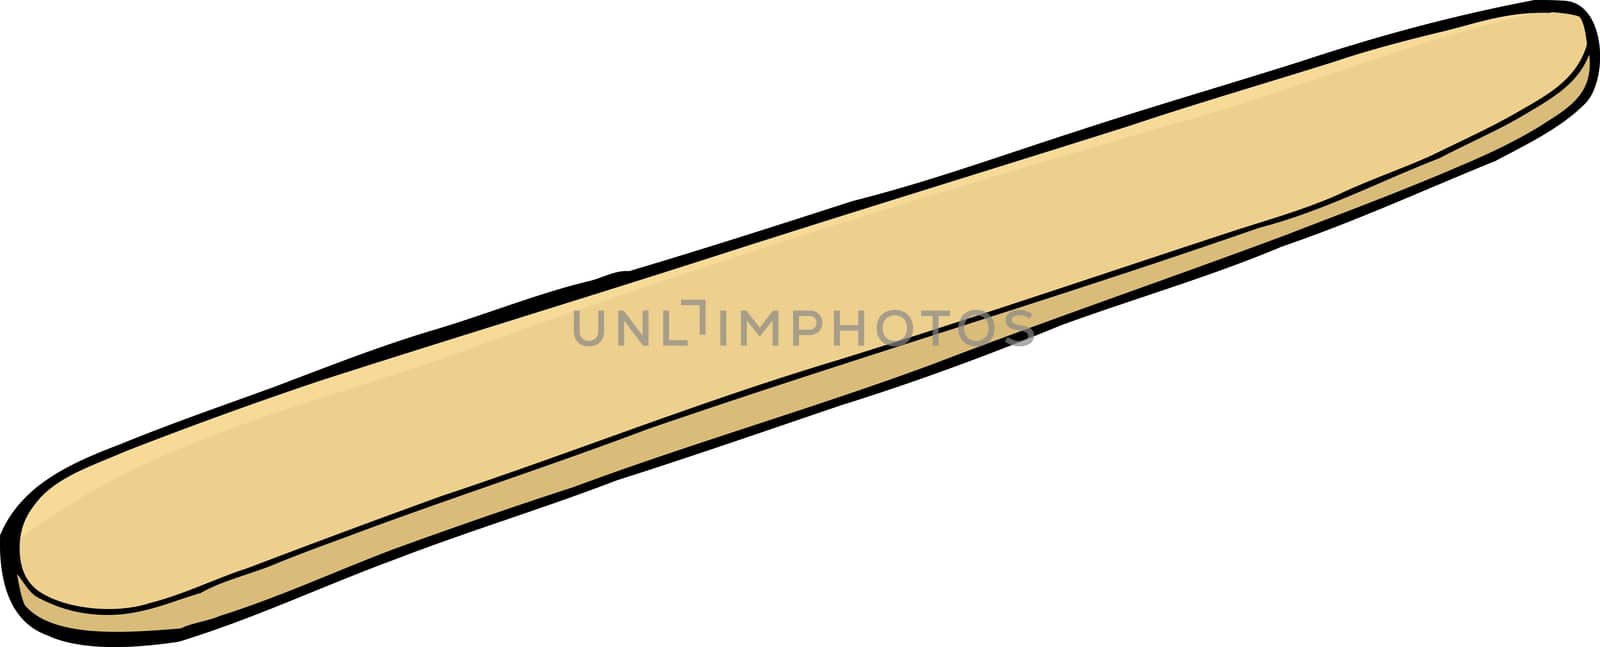 Isolated close up of tongue depressor over white